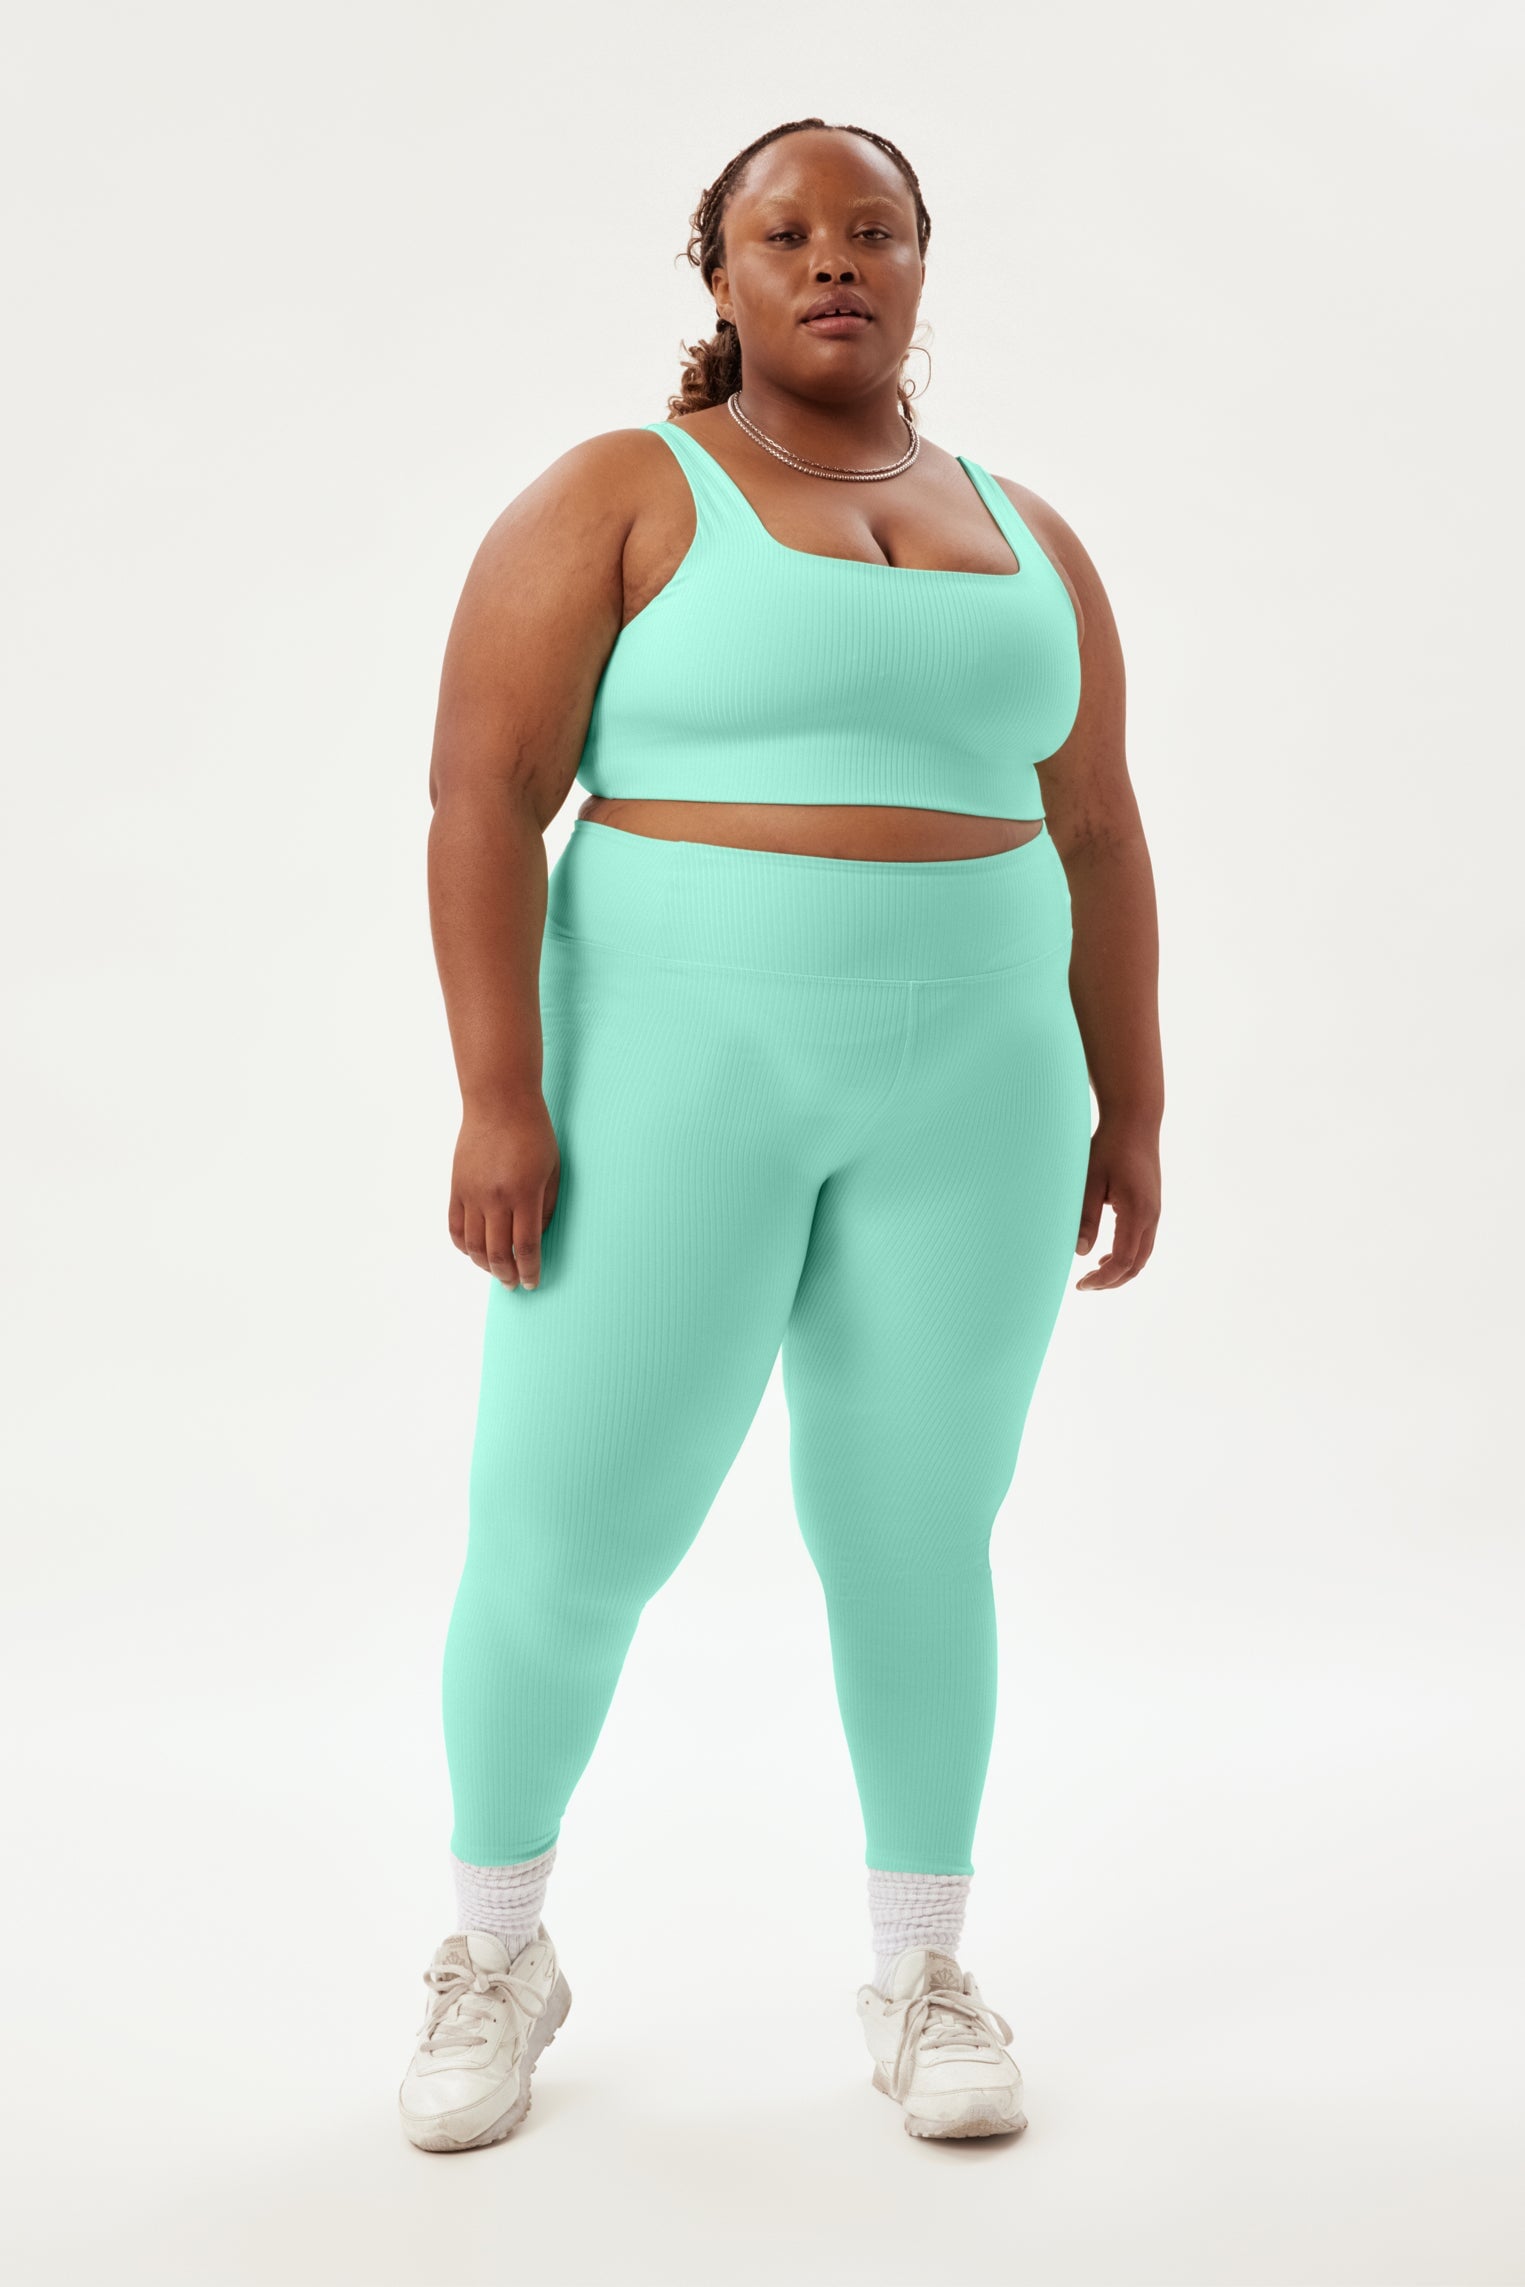 The Best Plus-Size Sports Bras From Nike. Nike HR